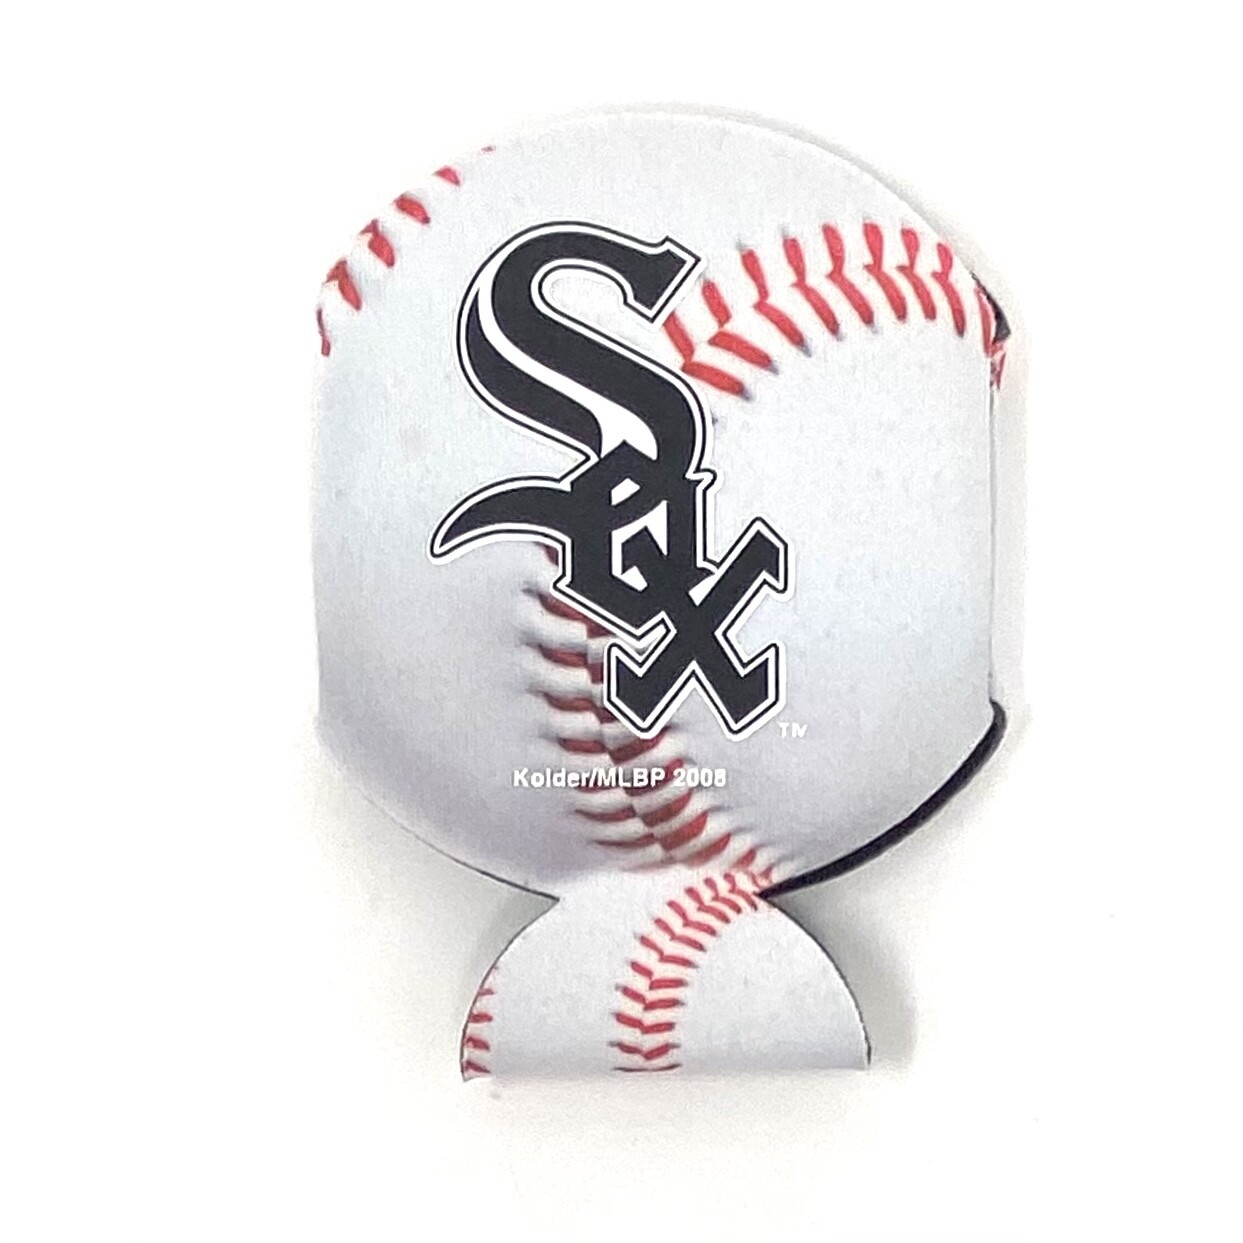 Chicago White Sox Coolers